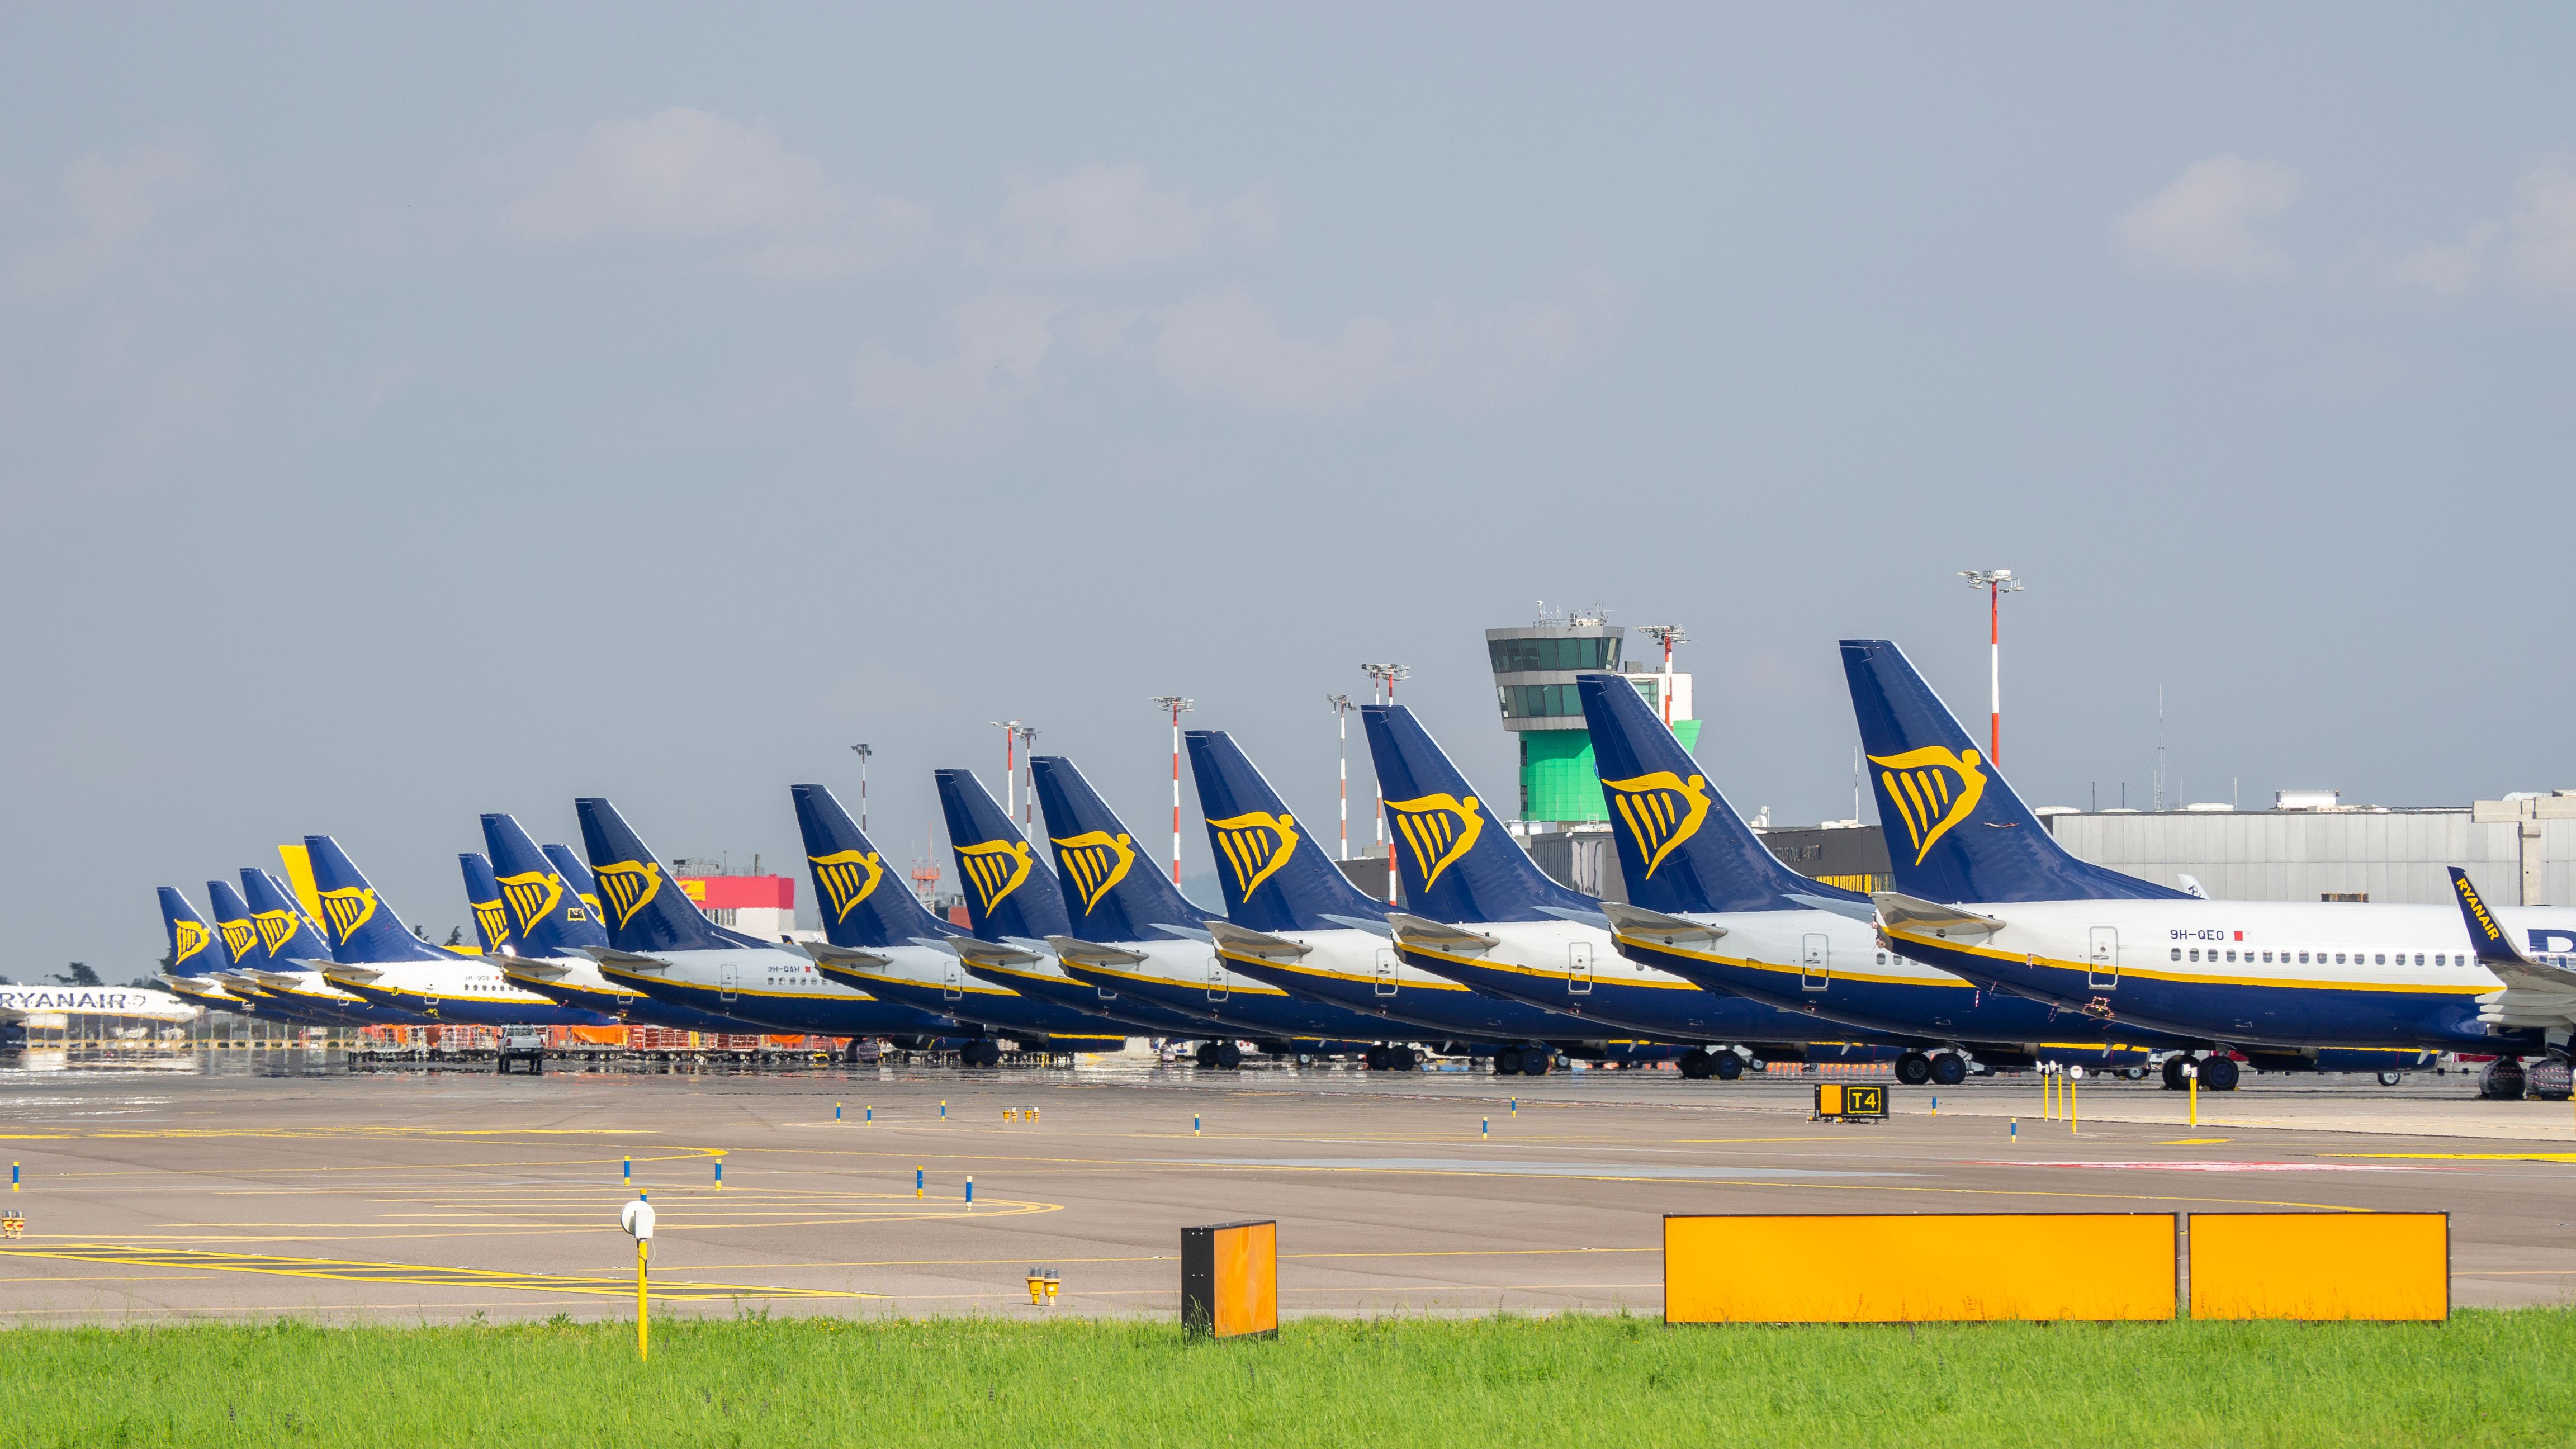 Over a dozen Ryanair aircraft tails at Bergamo Airport in Italy.